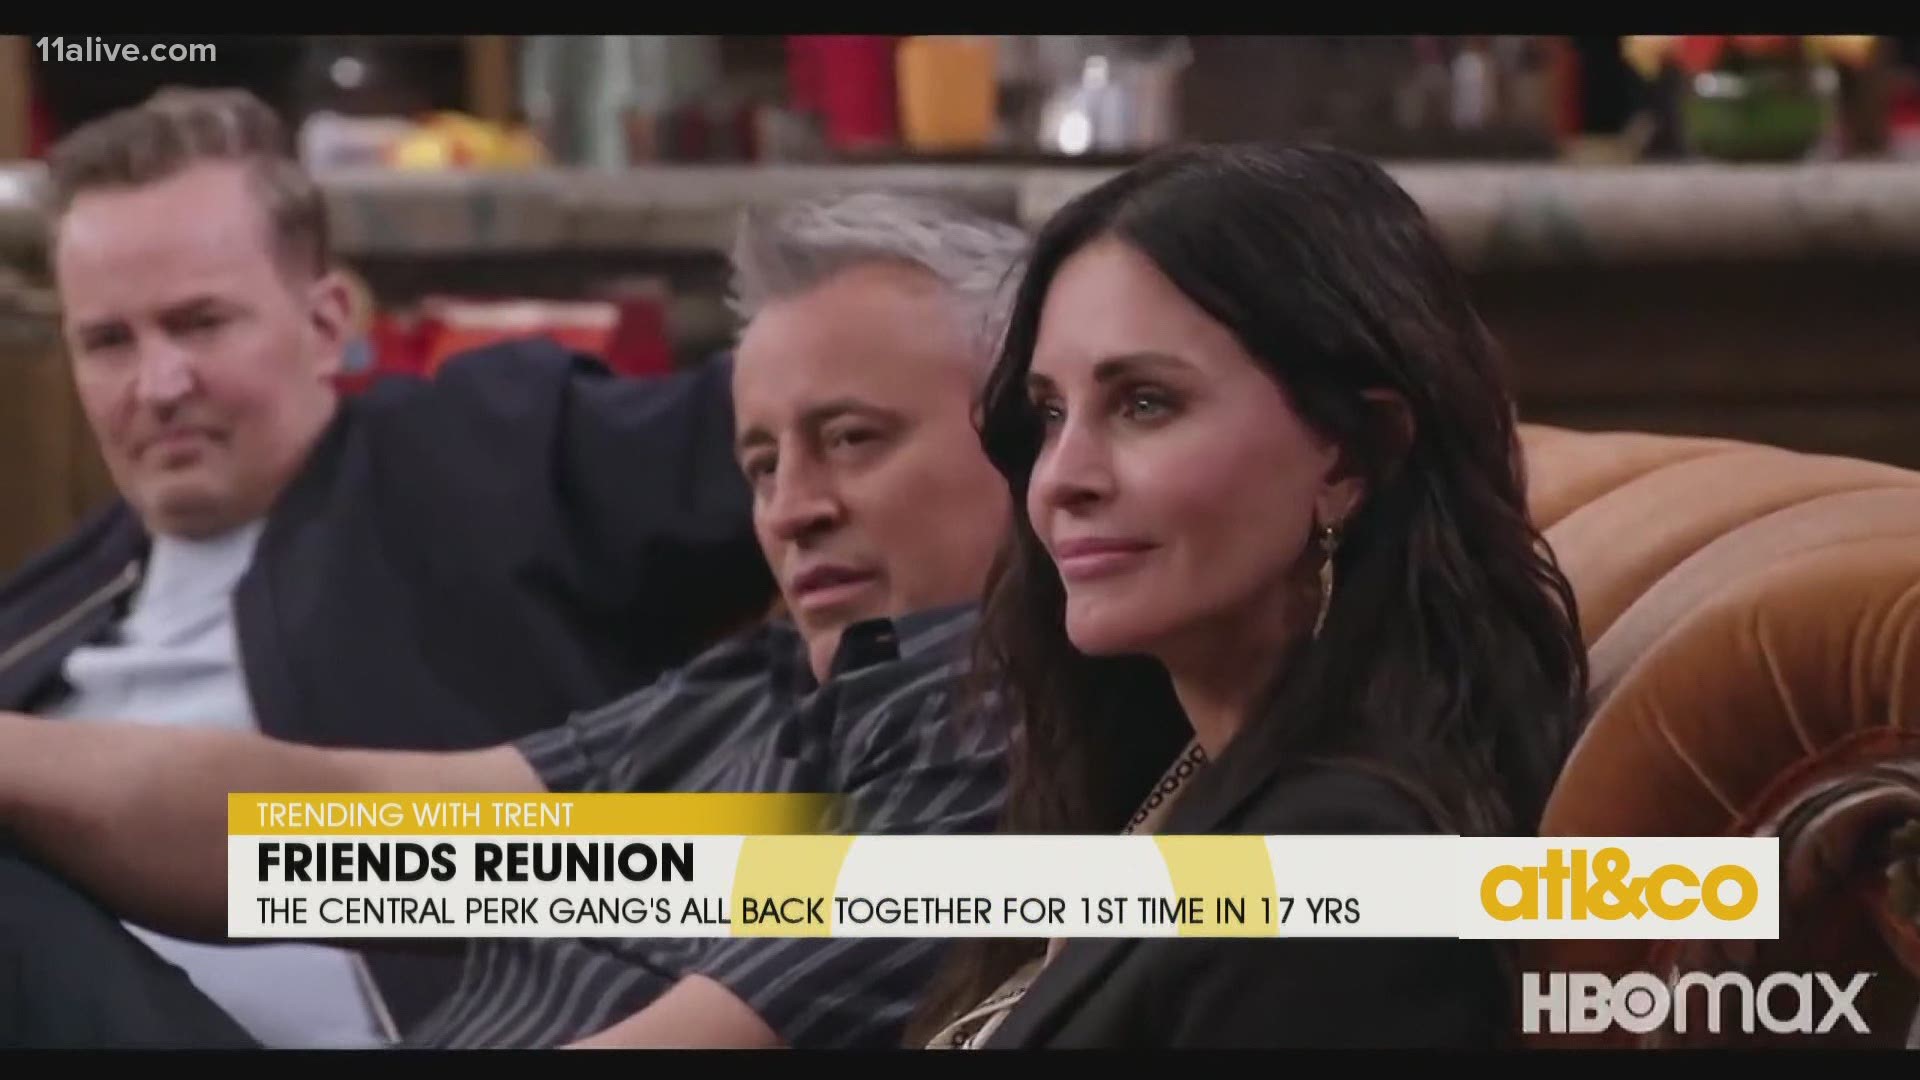 Your favorite 'Friends' are all back together for the first time in 17 years, this Thursday on HBO Max.